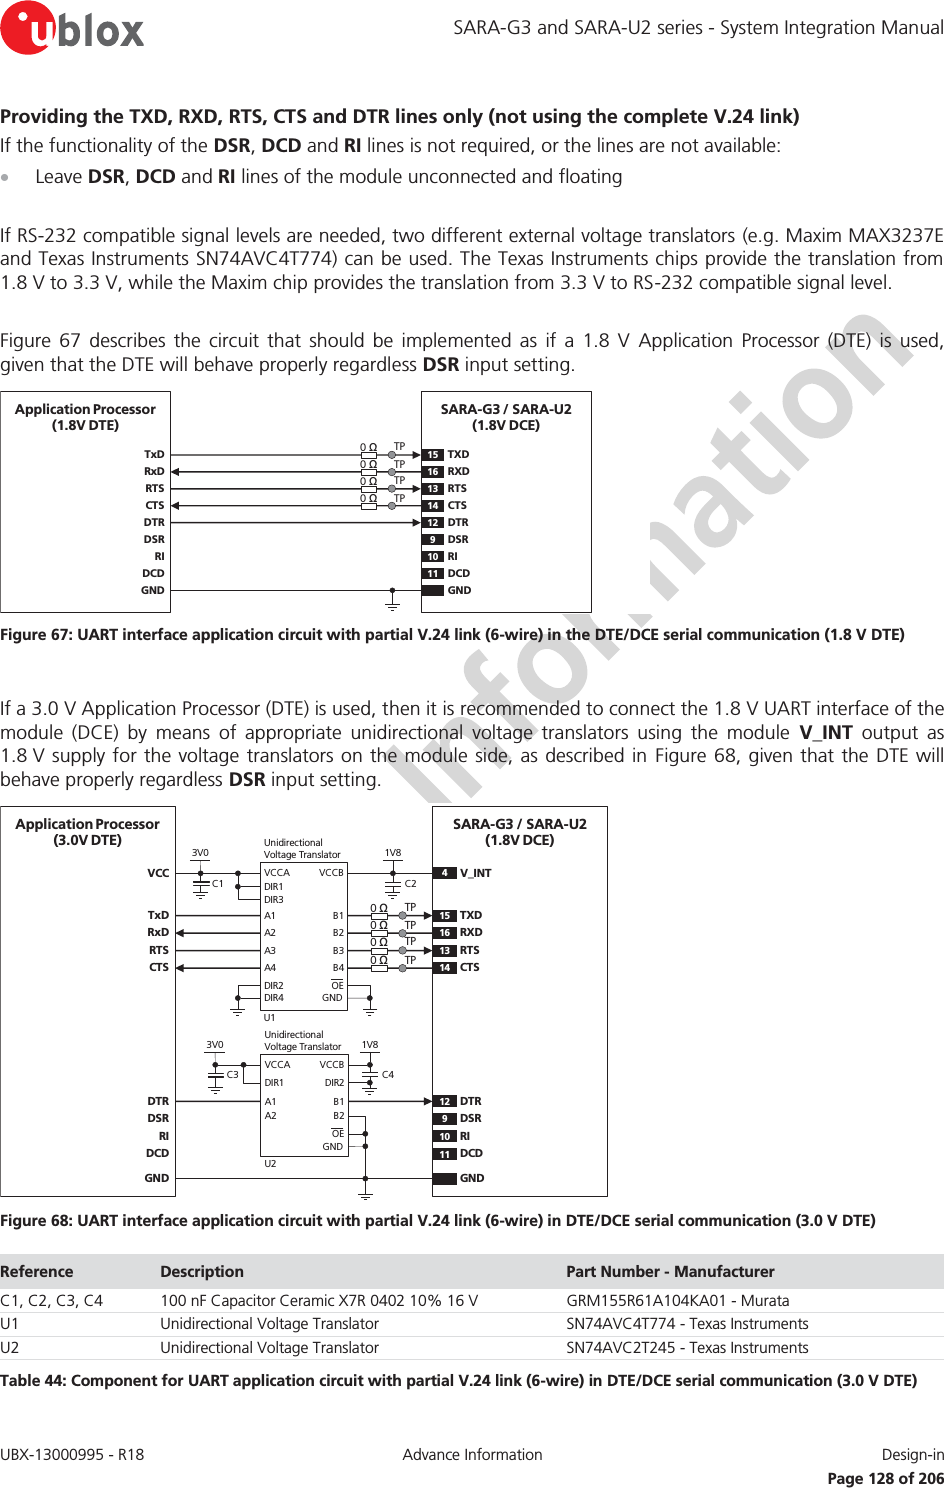 SARA-G3 and SARA-U2 series - System Integration Manual UBX-13000995 - R18  Advance Information  Design-in   Page 128 of 206 Providing the TXD, RXD, RTS, CTS and DTR lines only (not using the complete V.24 link) If the functionality of the DSR, DCD and RI lines is not required, or the lines are not available: x Leave DSR, DCD and RI lines of the module unconnected and floating  If RS-232 compatible signal levels are needed, two different external voltage translators (e.g. Maxim MAX3237E and Texas Instruments SN74AVC4T774) can be used. The Texas Instruments chips provide the translation from 1.8 V to 3.3 V, while the Maxim chip provides the translation from 3.3 V to RS-232 compatible signal level.  Figure 67 describes the circuit that should be implemented as if a 1.8 V Application Processor (DTE) is used, given that the DTE will behave properly regardless DSR input setting. TxDApplication Processor(1.8V DTE)RxDRTSCTSDTRDSRRIDCDGNDSARA-G3 / SARA-U2(1.8V DCE)15TXD12DTR16RXD13RTS14CTS9DSR10RI11 DCDGND0 Ω0 ΩTPTP0 Ω0 ΩTPTP Figure 67: UART interface application circuit with partial V.24 link (6-wire) in the DTE/DCE serial communication (1.8 V DTE)  If a 3.0 V Application Processor (DTE) is used, then it is recommended to connect the 1.8 V UART interface of the module (DCE) by means of appropriate unidirectional voltage translators using the module V_INT output as 1.8 V supply for the voltage translators on the module side, as described in Figure 68, given that the DTE will behave properly regardless DSR input setting. 4V_INTTxDApplication Processor(3.0V DTE)RxDRTSCTSDTRDSRRIDCDGNDSARA-G3 / SARA-U2(1.8V DCE)15TXD12DTR16RXD13RTS14CTS9DSR10 RI11DCDGND0 Ω0 ΩTPTP0 Ω0 ΩTPTP1V8B1 A1GNDU1B3A3VCCBVCCAUnidirectionalVoltage TranslatorC1 C23V0DIR3DIR2 OEDIR1VCCB2 A2B4A4DIR41V8B1 A1GNDU2VCCBVCCAUnidirectionalVoltage TranslatorC33V0DIR1OEB2 A2DIR2 C4 Figure 68: UART interface application circuit with partial V.24 link (6-wire) in DTE/DCE serial communication (3.0 V DTE) Reference  Description  Part Number - Manufacturer C1, C2, C3, C4 100 nF Capacitor Ceramic X7R 0402 10% 16 V GRM155R61A104KA01 - Murata U1 Unidirectional Voltage Translator SN74AVC4T774 - Texas Instruments U2 Unidirectional Voltage Translator SN74AVC2T245 - Texas Instruments Table 44: Component for UART application circuit with partial V.24 link (6-wire) in DTE/DCE serial communication (3.0 V DTE) 